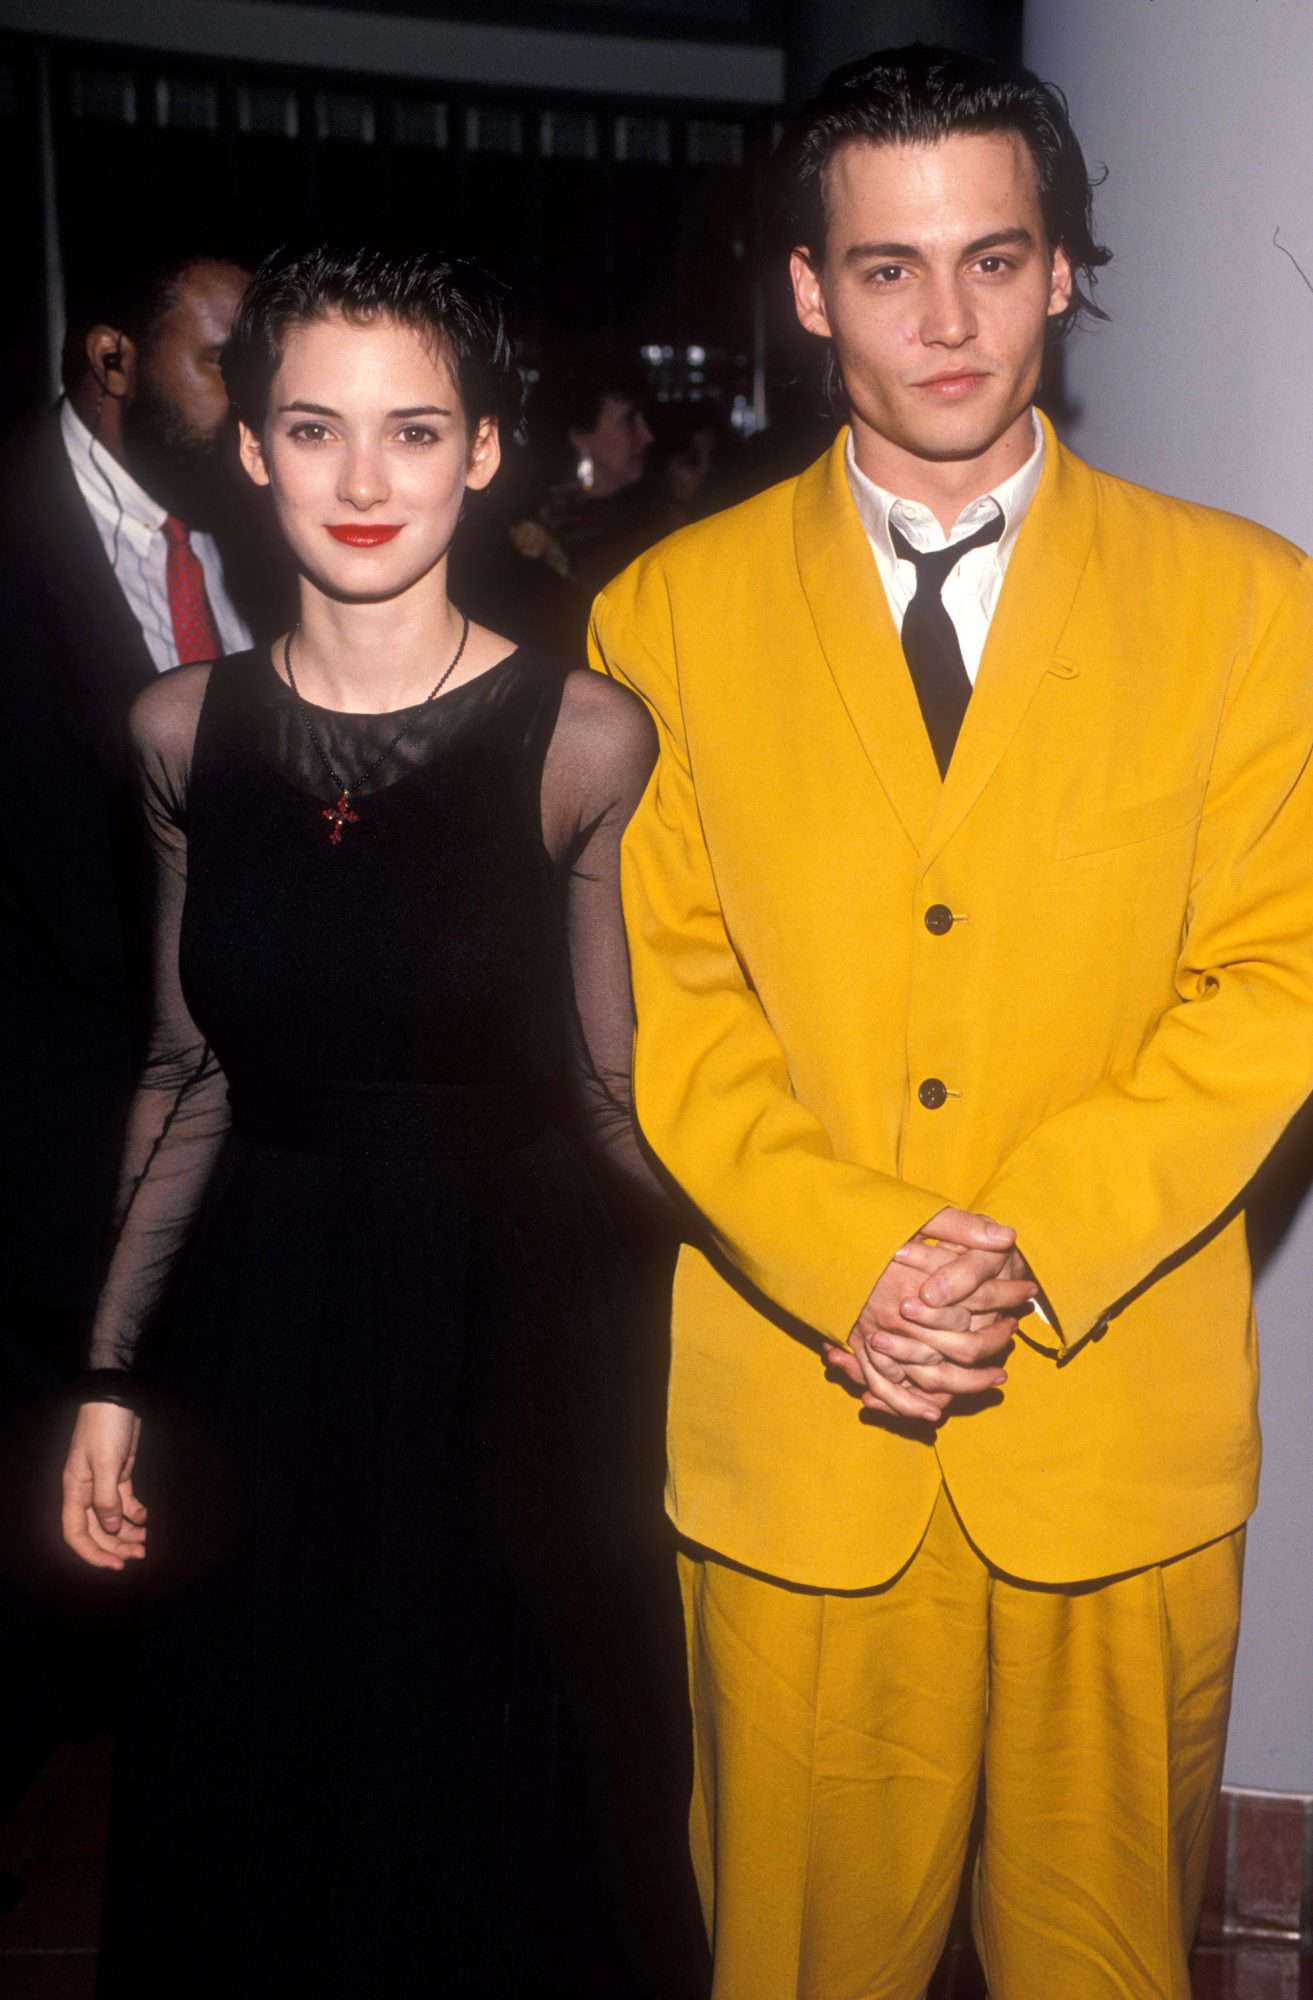 Winona Ryder Describes Her Life in '90s Post Johnny Depp Split as 'My Girl, Interrupted Real Life'